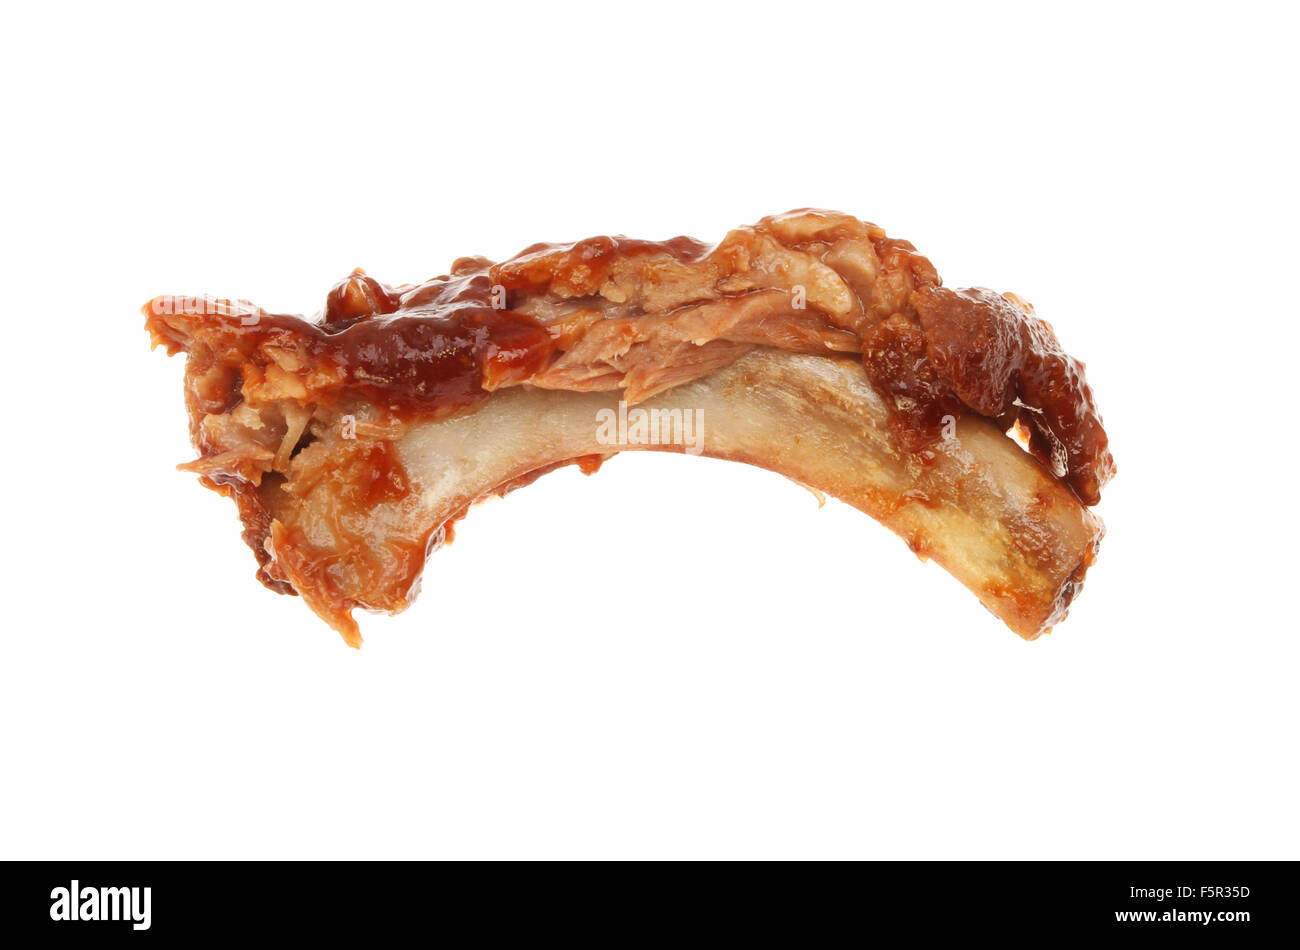 Pork spare rib cooked in barbecue sauce isolated against white Stock Photo